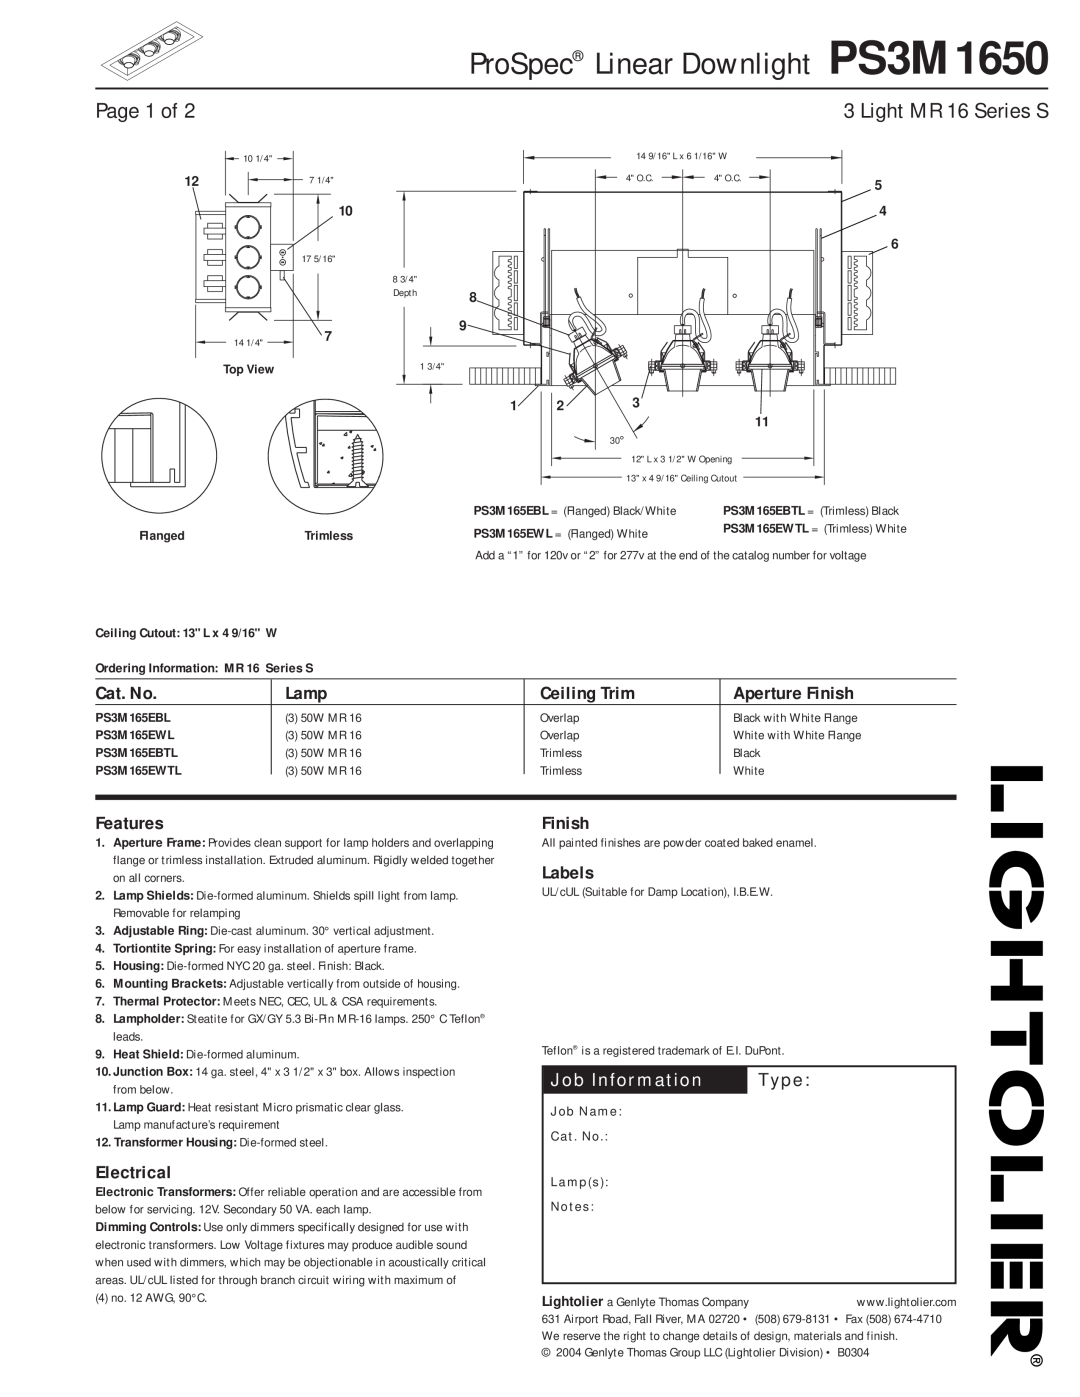 Lightolier manual ProSpec Linear Downlight PS3M1650, Page 1 of, Cat. No, Lamp, Ceiling Trim, Aperture Finish, Features 